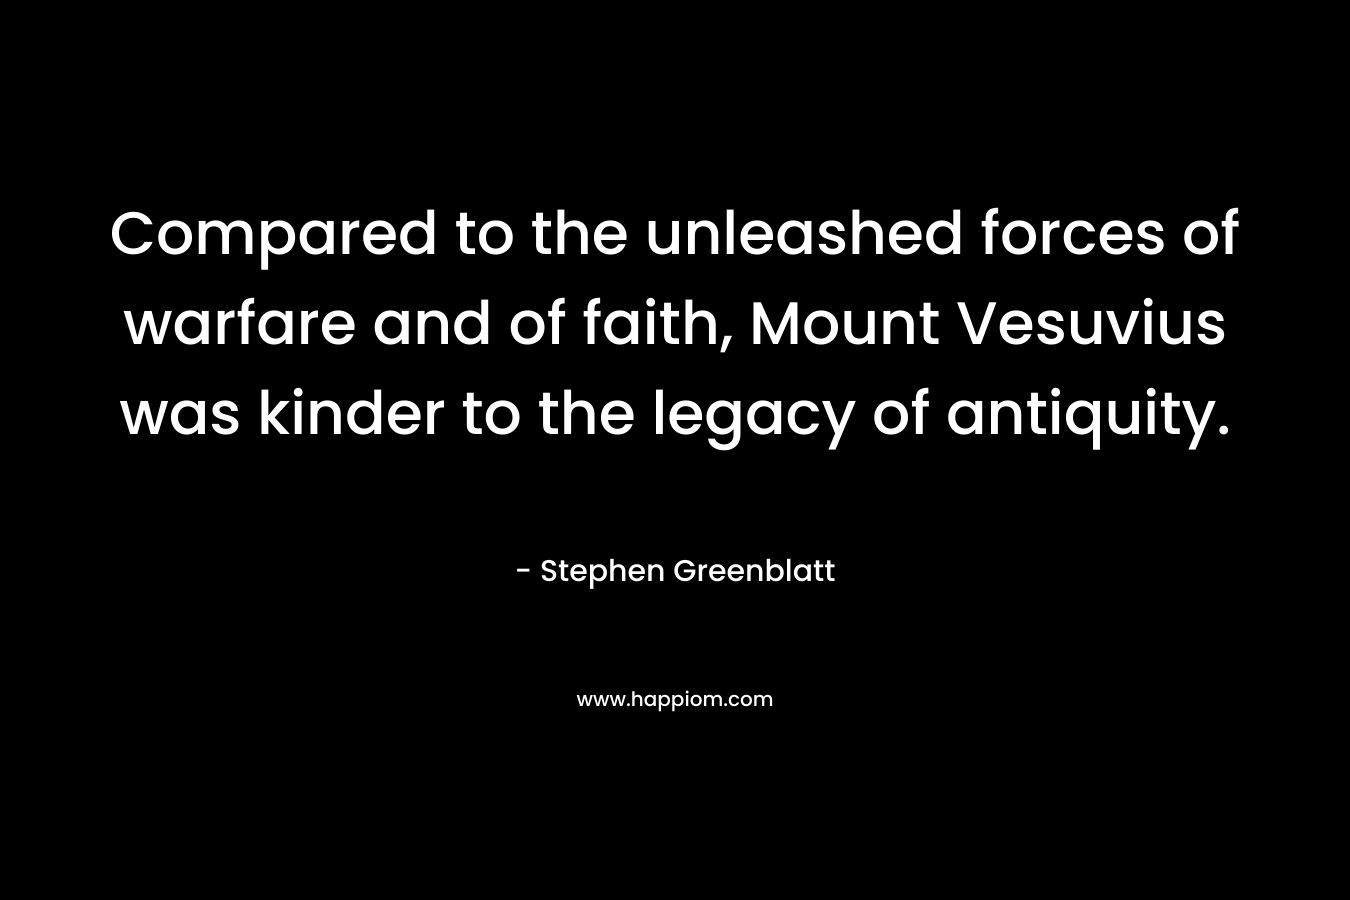 Compared to the unleashed forces of warfare and of faith, Mount Vesuvius was kinder to the legacy of antiquity. – Stephen Greenblatt